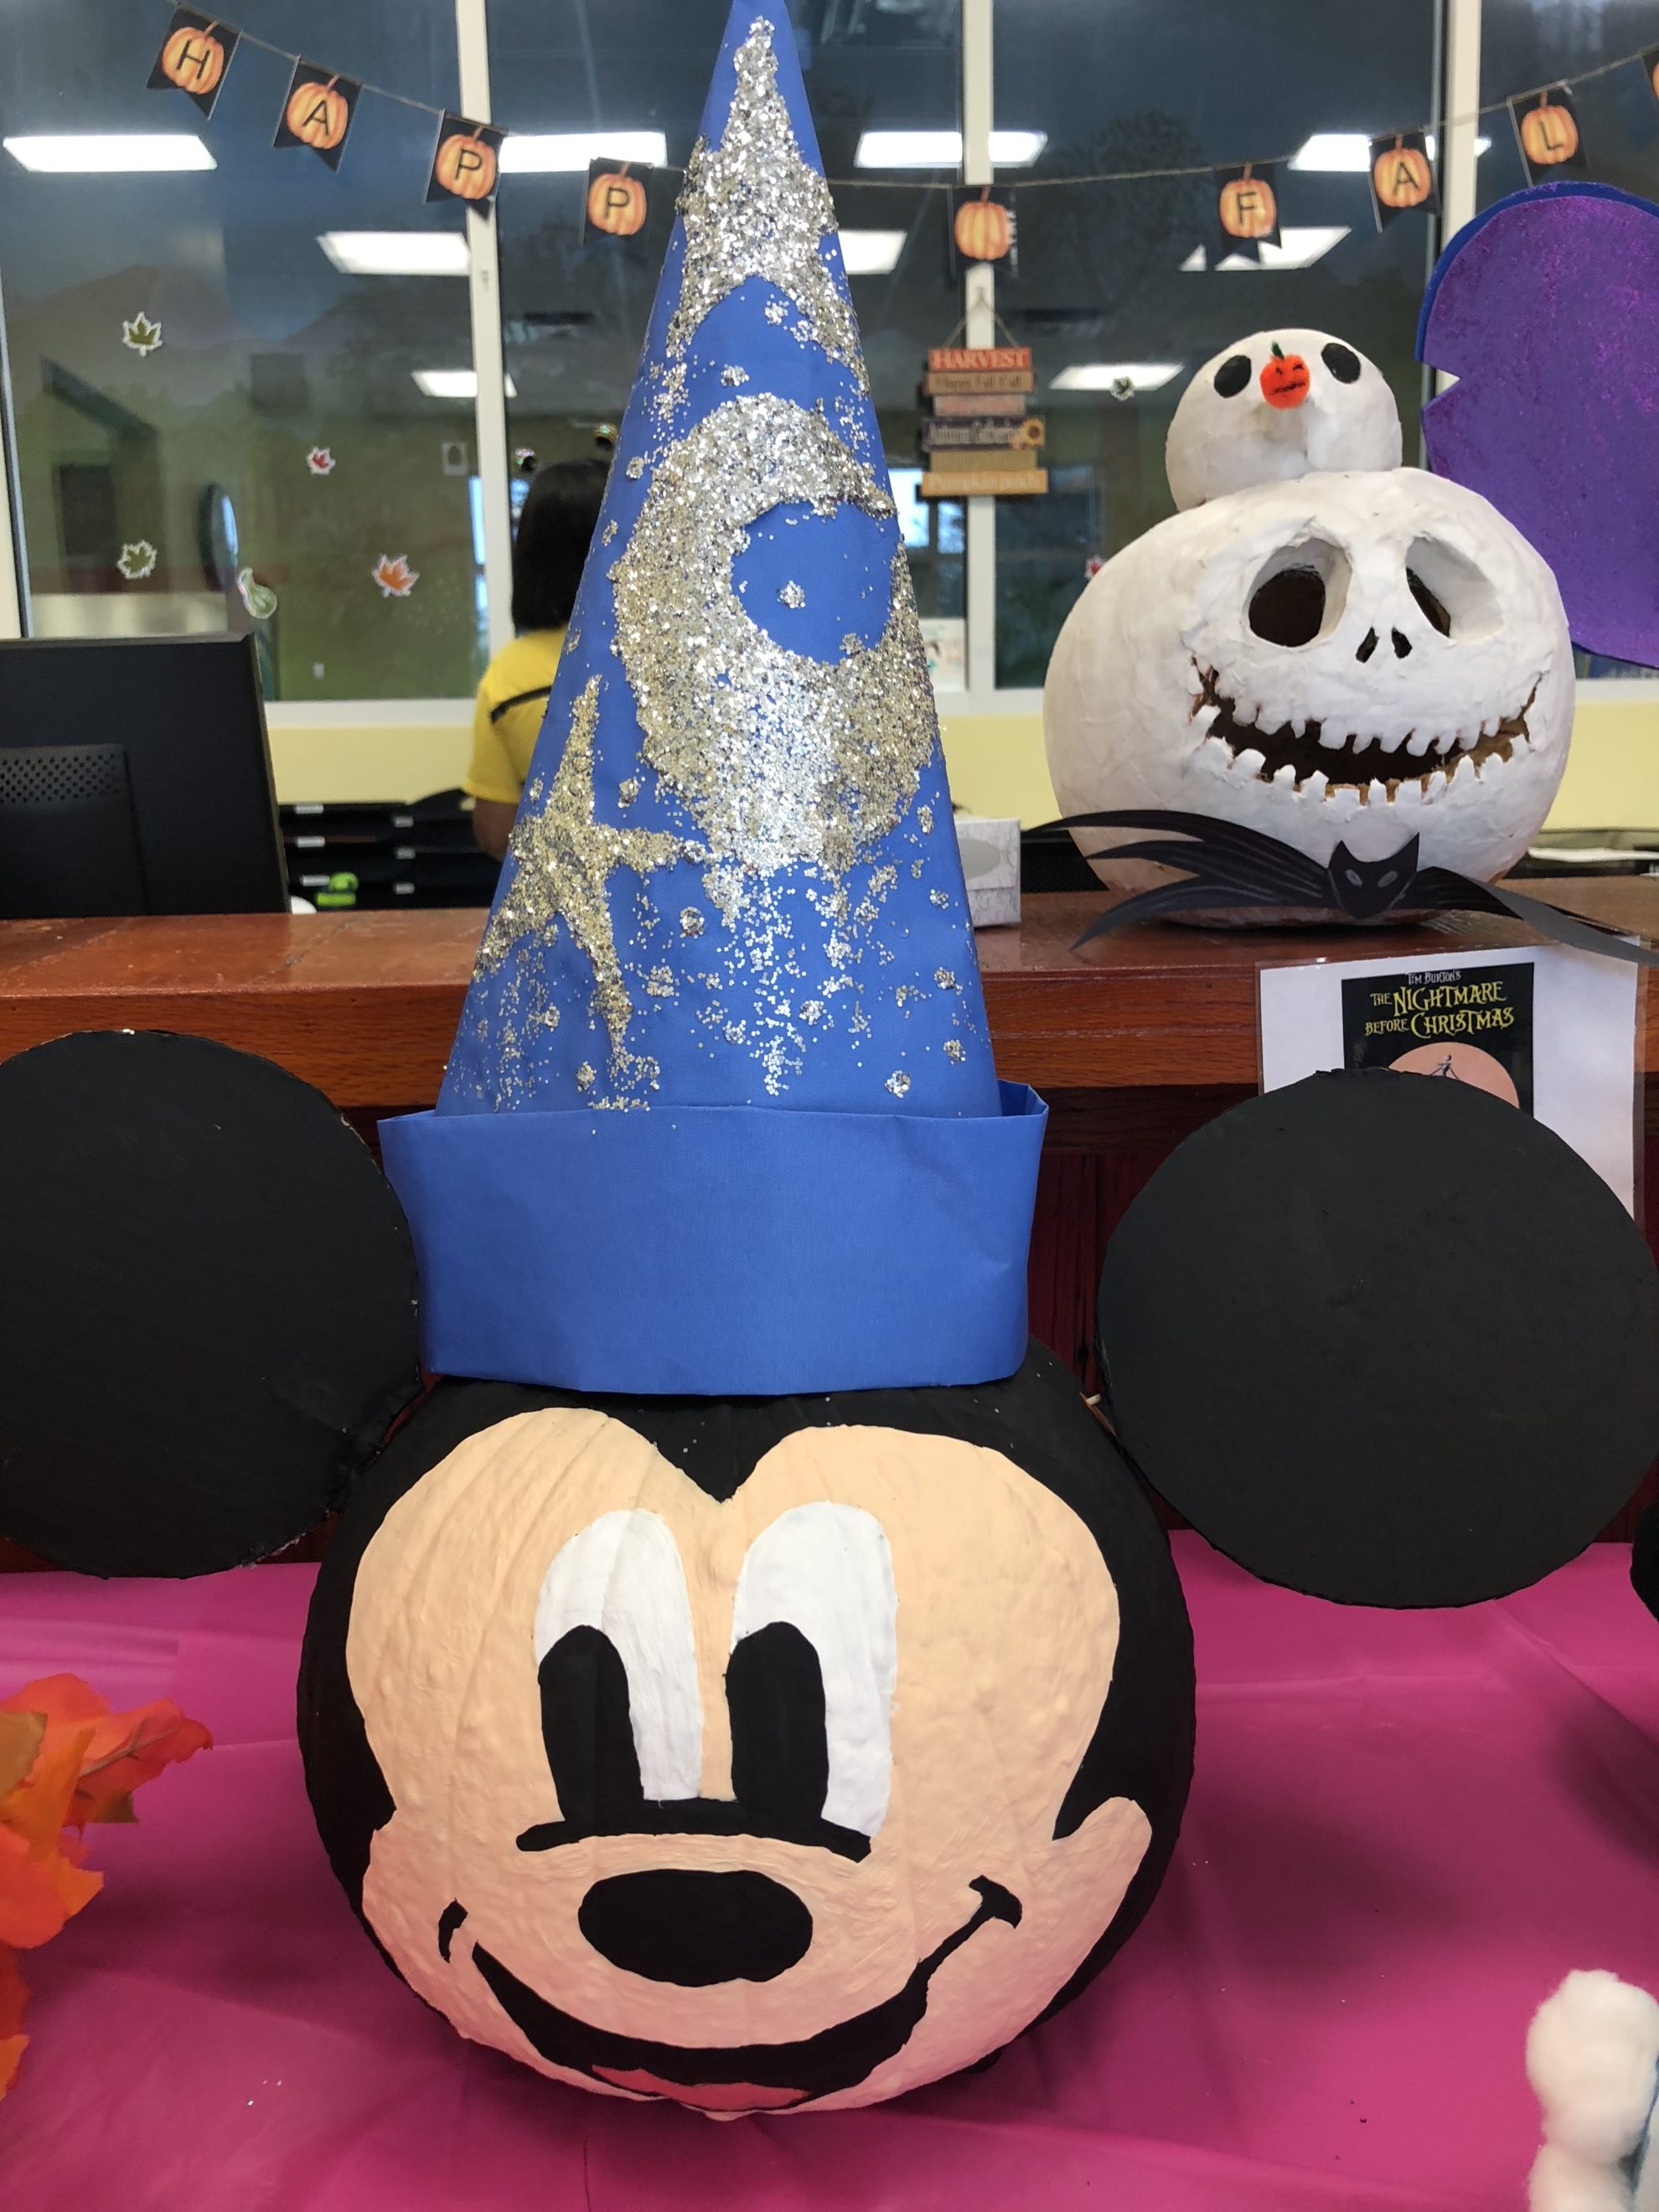 Sorcer Mickey Mouse painted pumpkin with cardboard ears and blue hat.